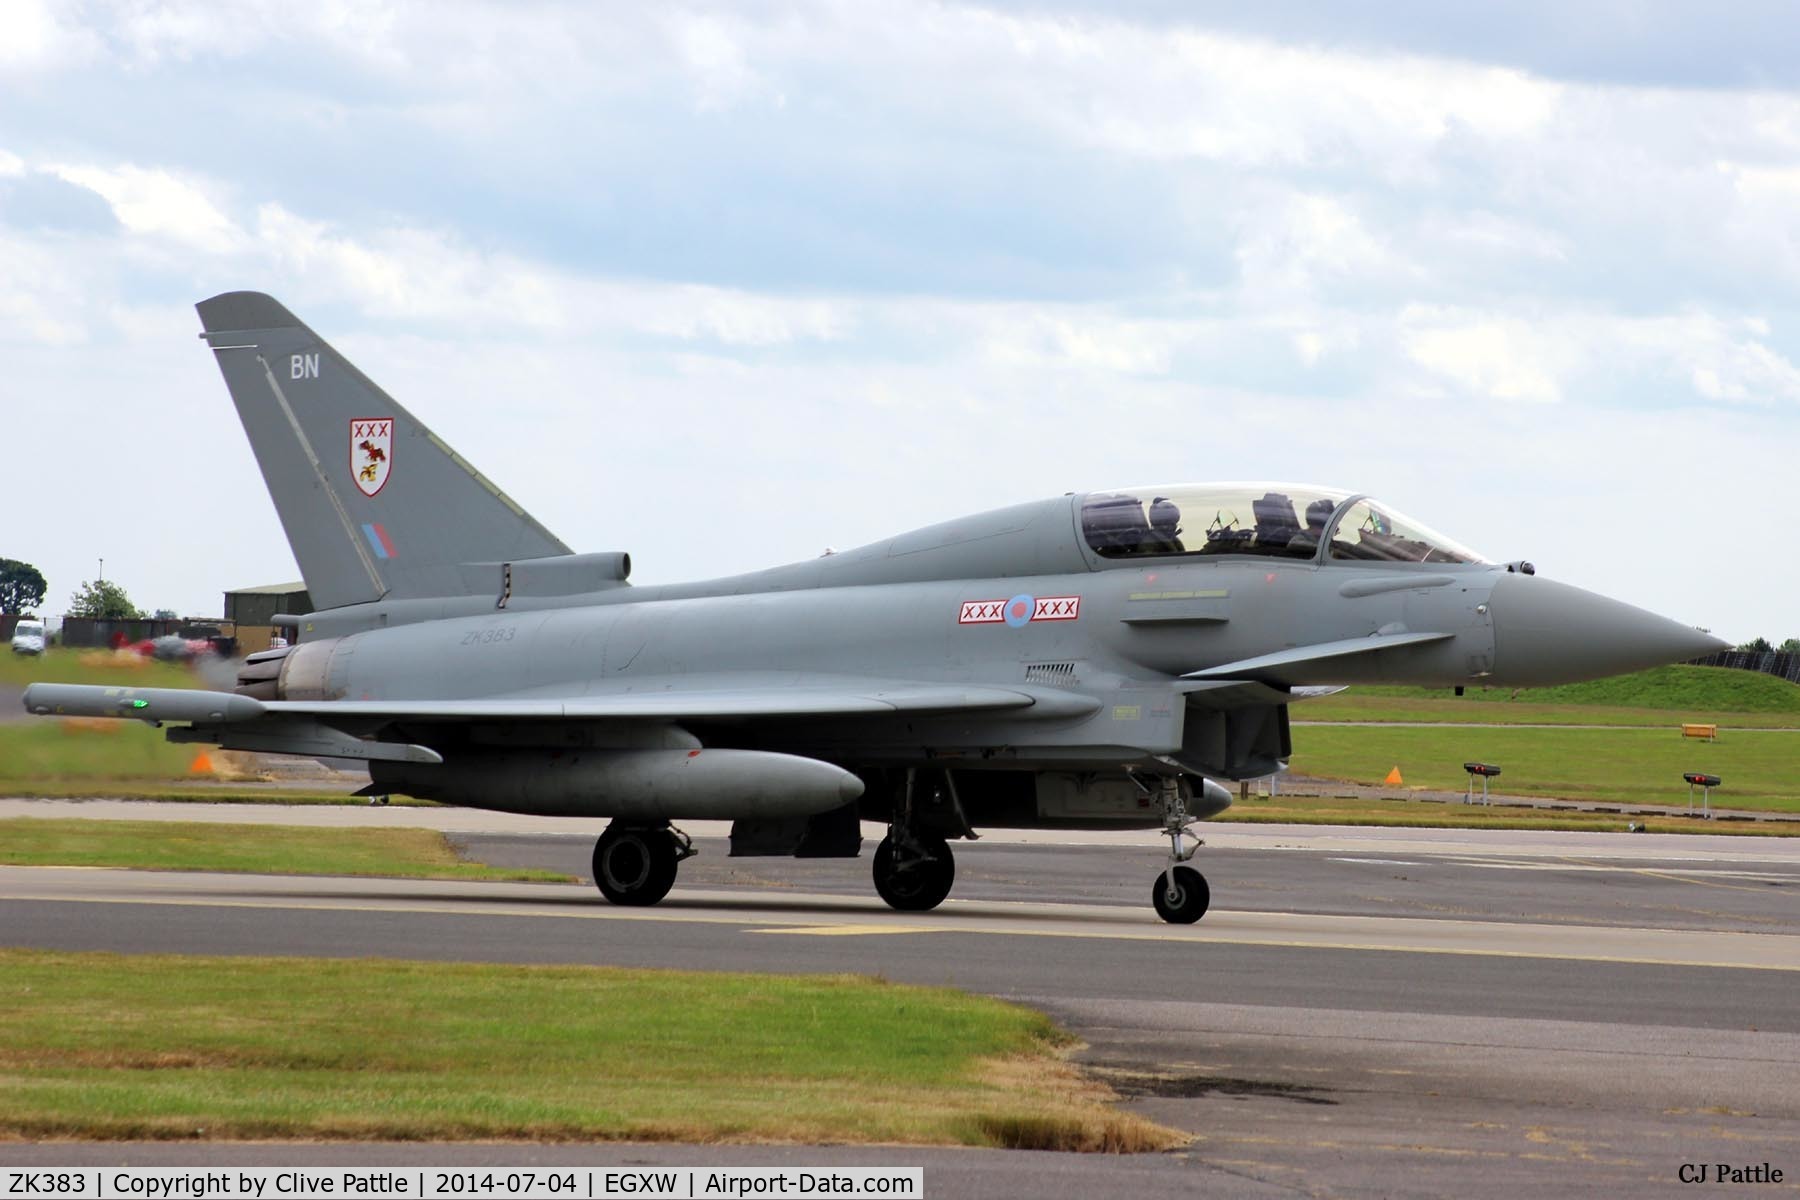 ZK383, 2013 Eurofighter EF-2000 Typhoon T.3 C/N BT028/393, Taxy to static display at RAF Waddington for Airshow 2014